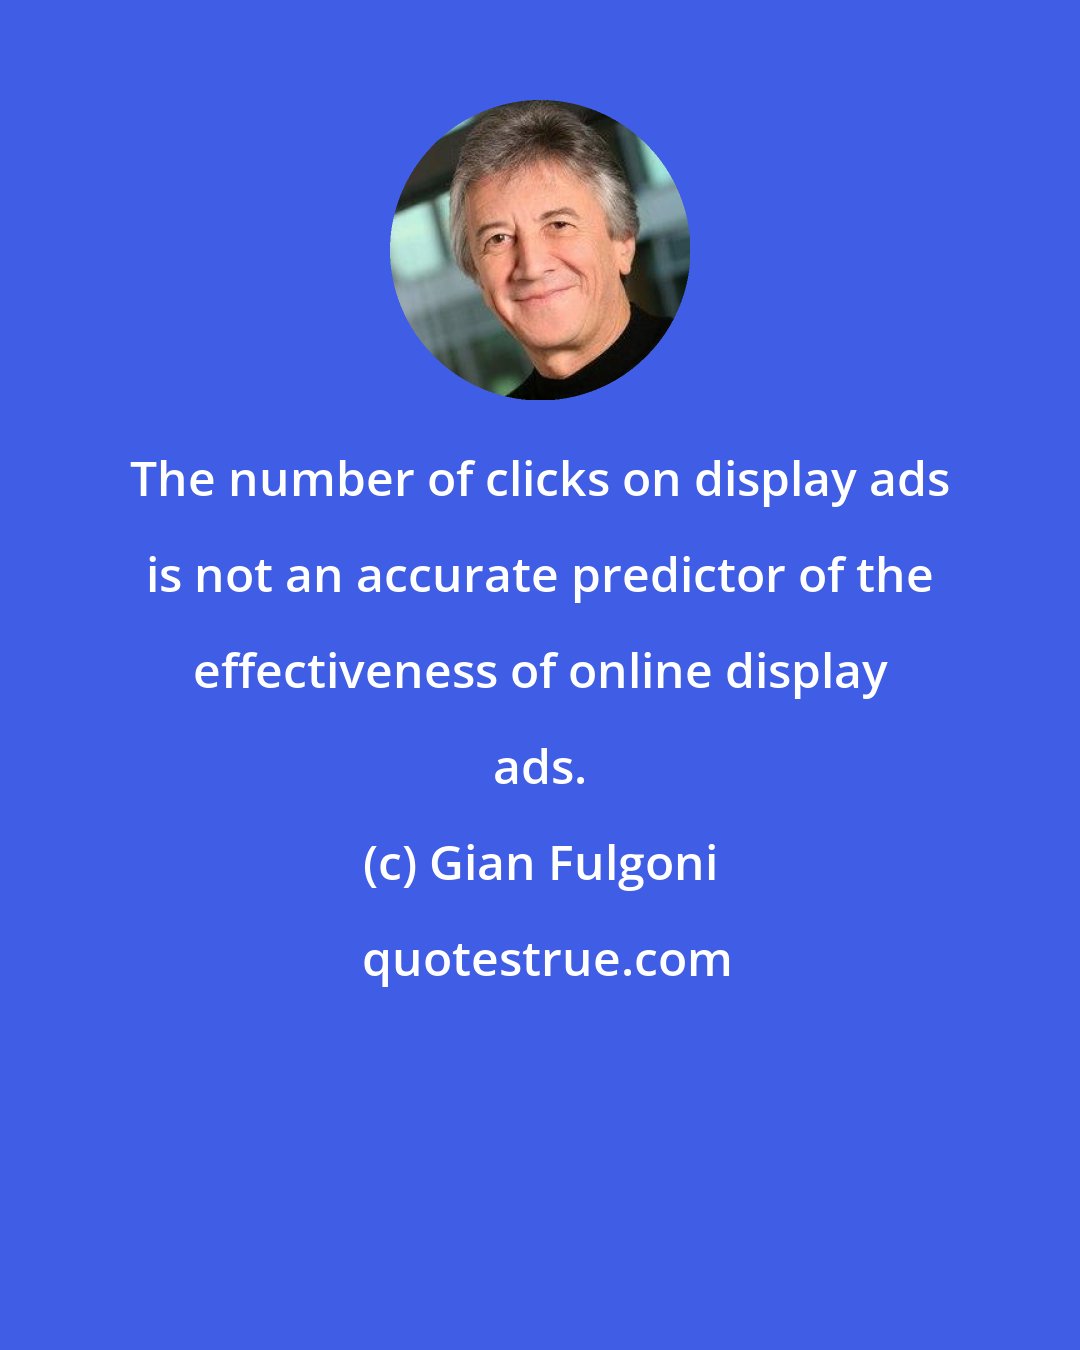 Gian Fulgoni: The number of clicks on display ads is not an accurate predictor of the effectiveness of online display ads.